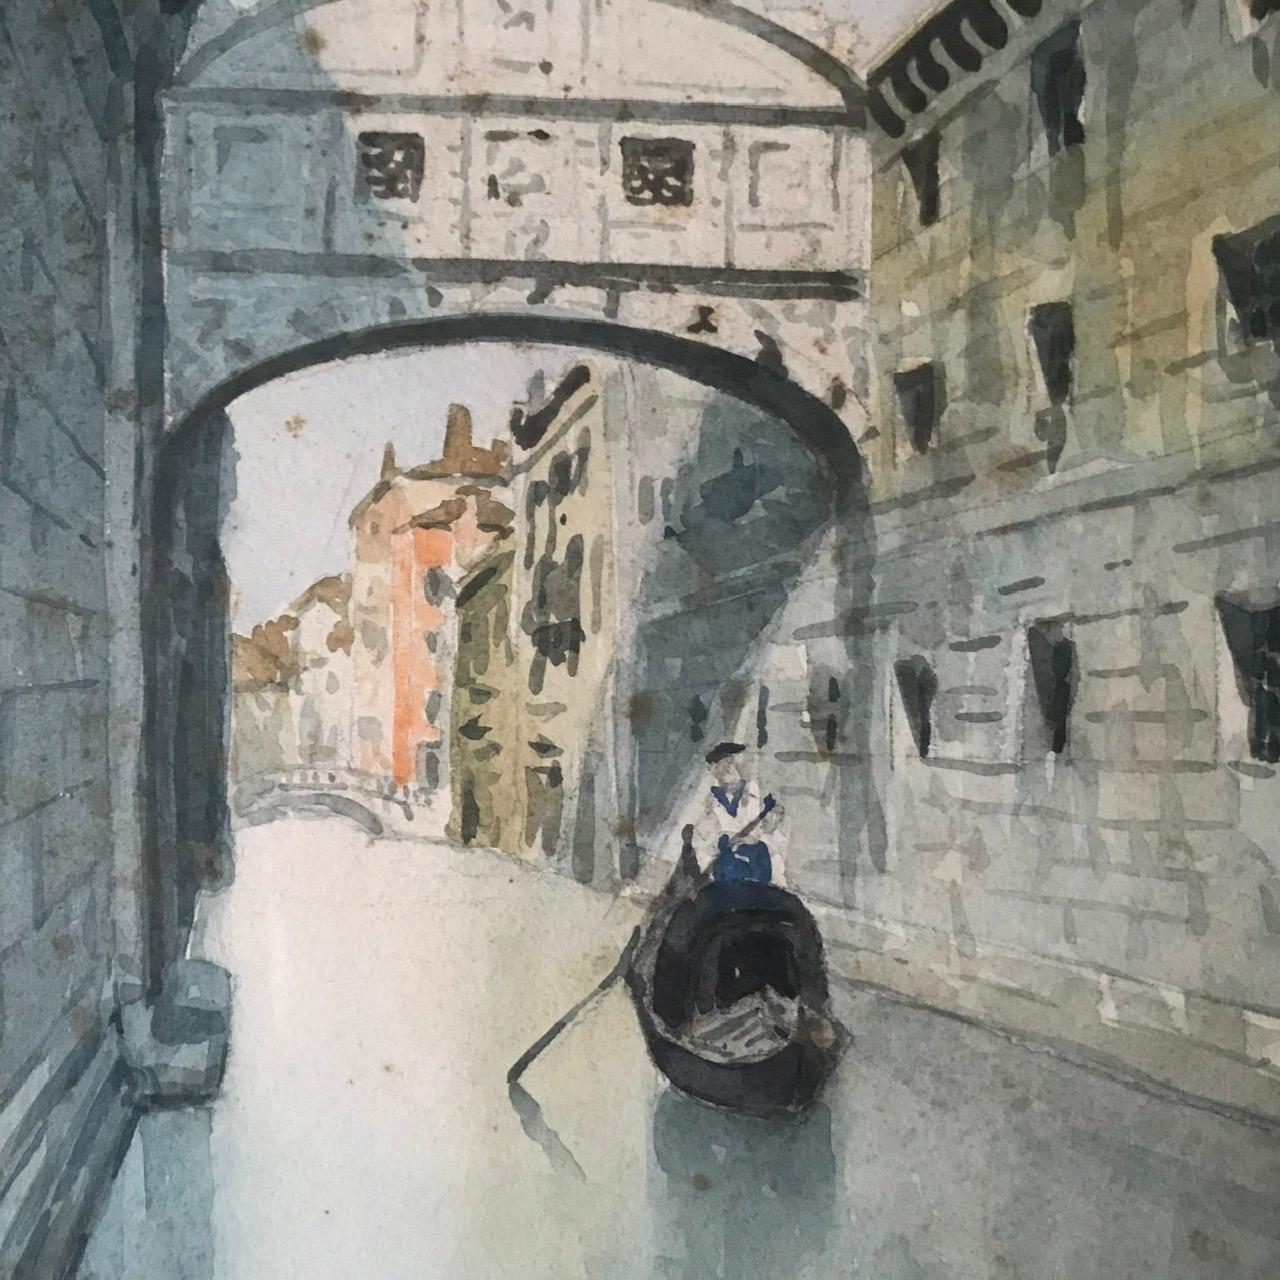 Nice little watercolour representing the city of Venice in Italy. We see a gondolier on the Rio de la Canonica canal located between the Ducal Palace and the prison. These two buildings are linked by the famous Bridge of Sighs. So called because it